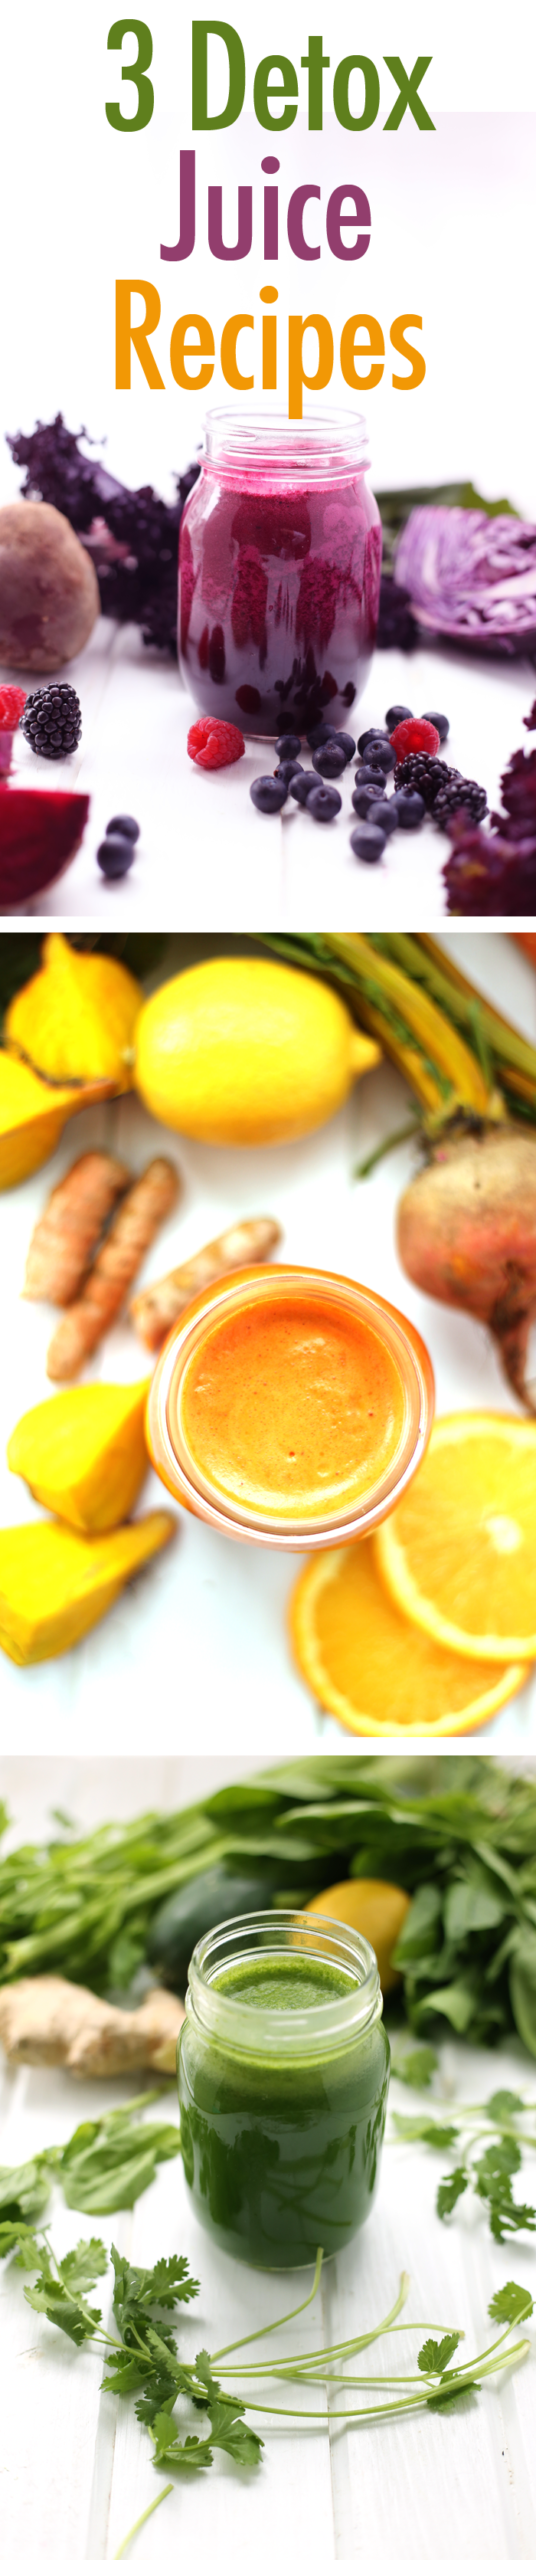 3 healthy detox juice recipes for clear skin, digestion and energy!